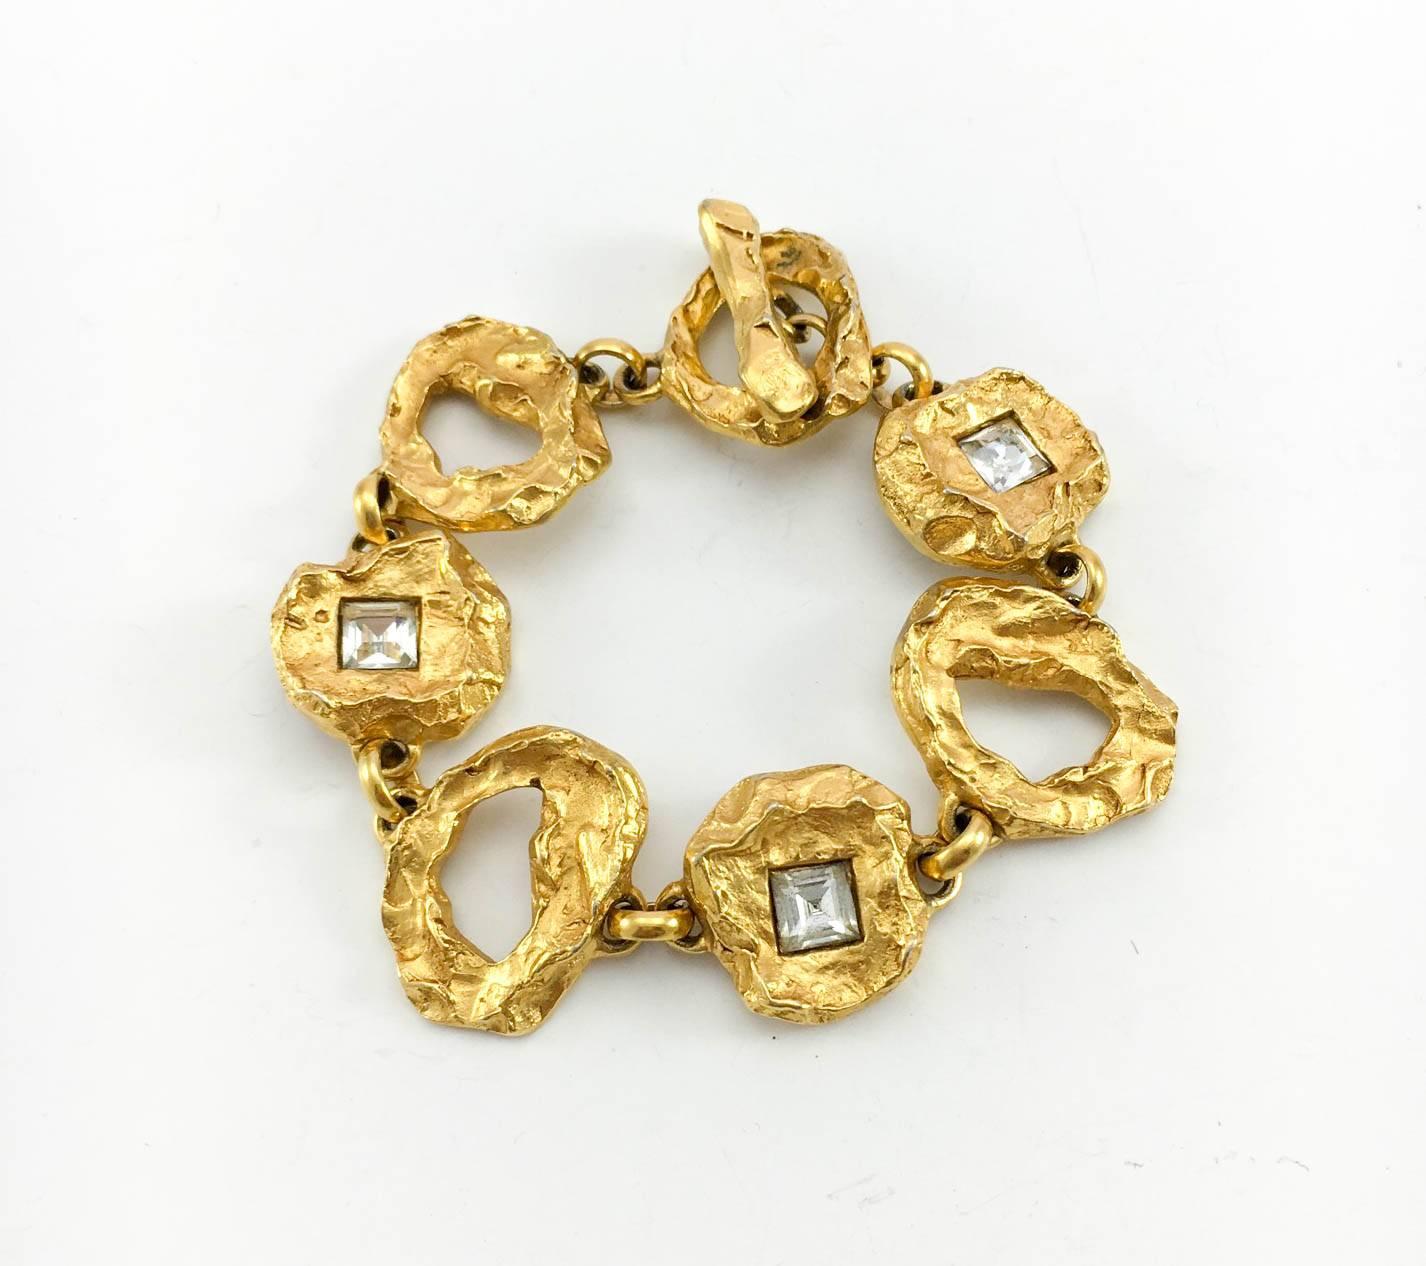 Lacroix Gold-Plated and Rhinestone Bracelet, by Goossens - 1980s 1